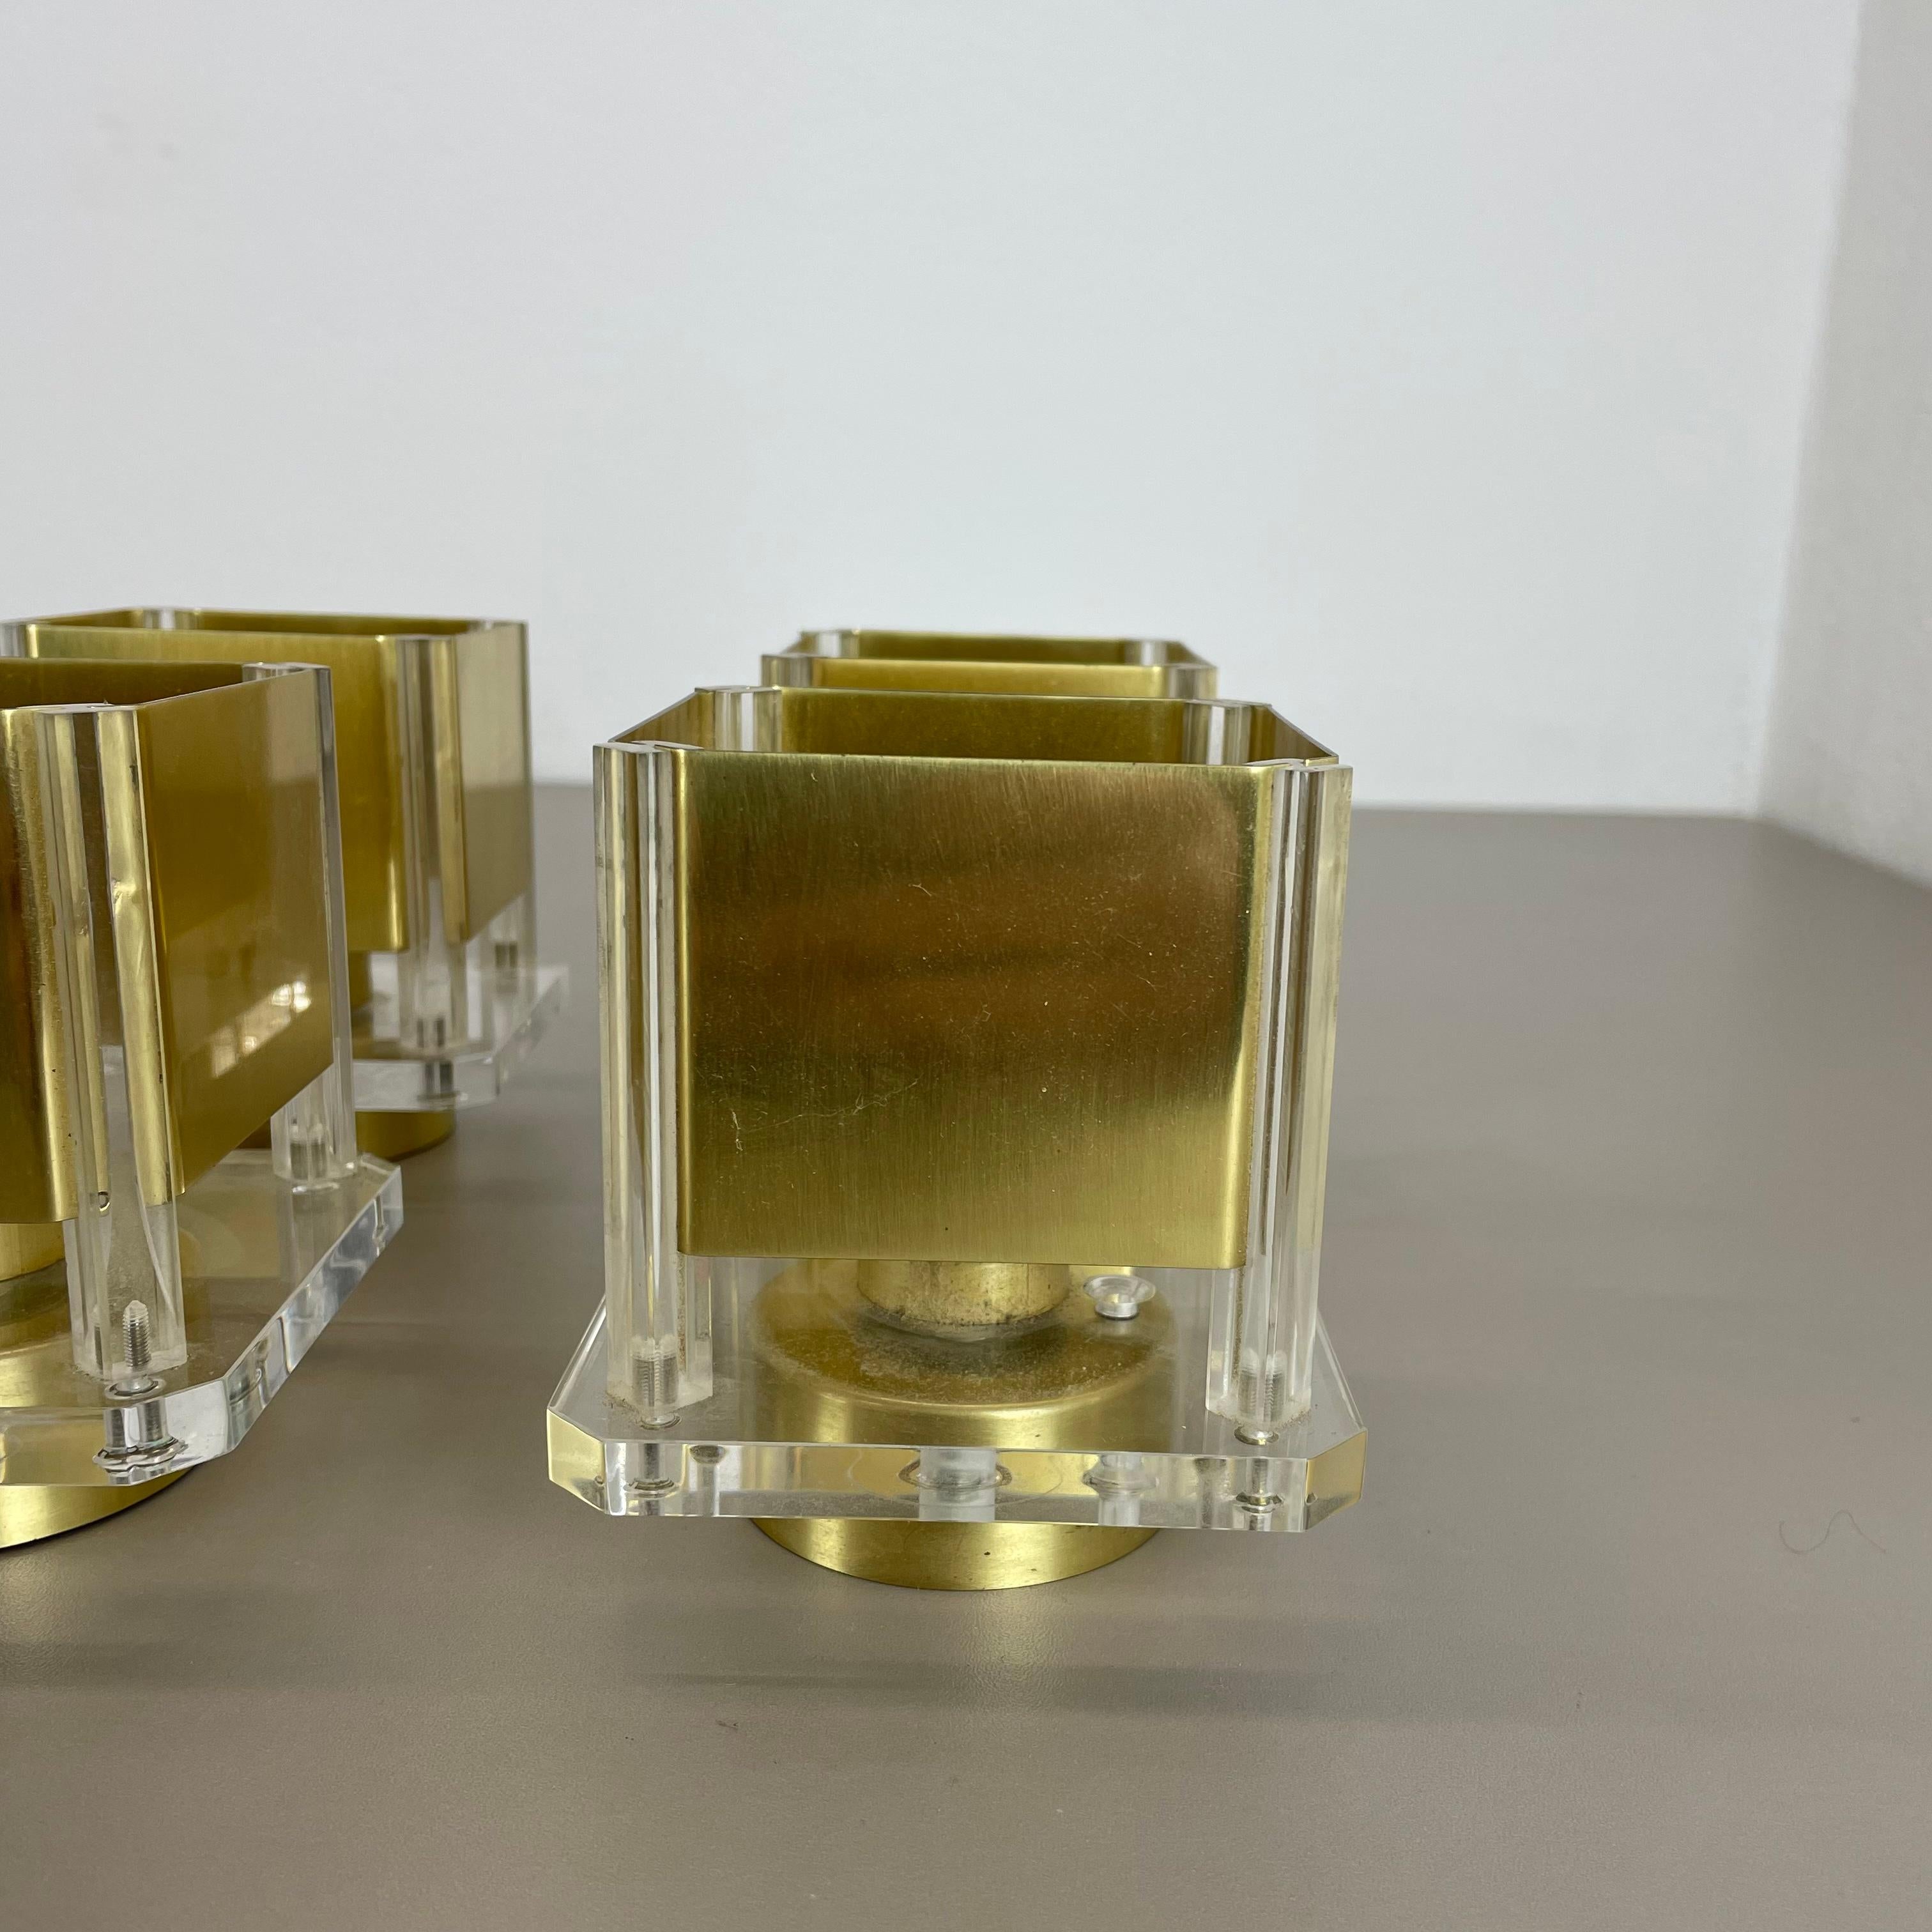 Set of 2 Brass + Acryl Glass Cubic Stilnovo Style Wall Light Sconces, Italy 1970 For Sale 9